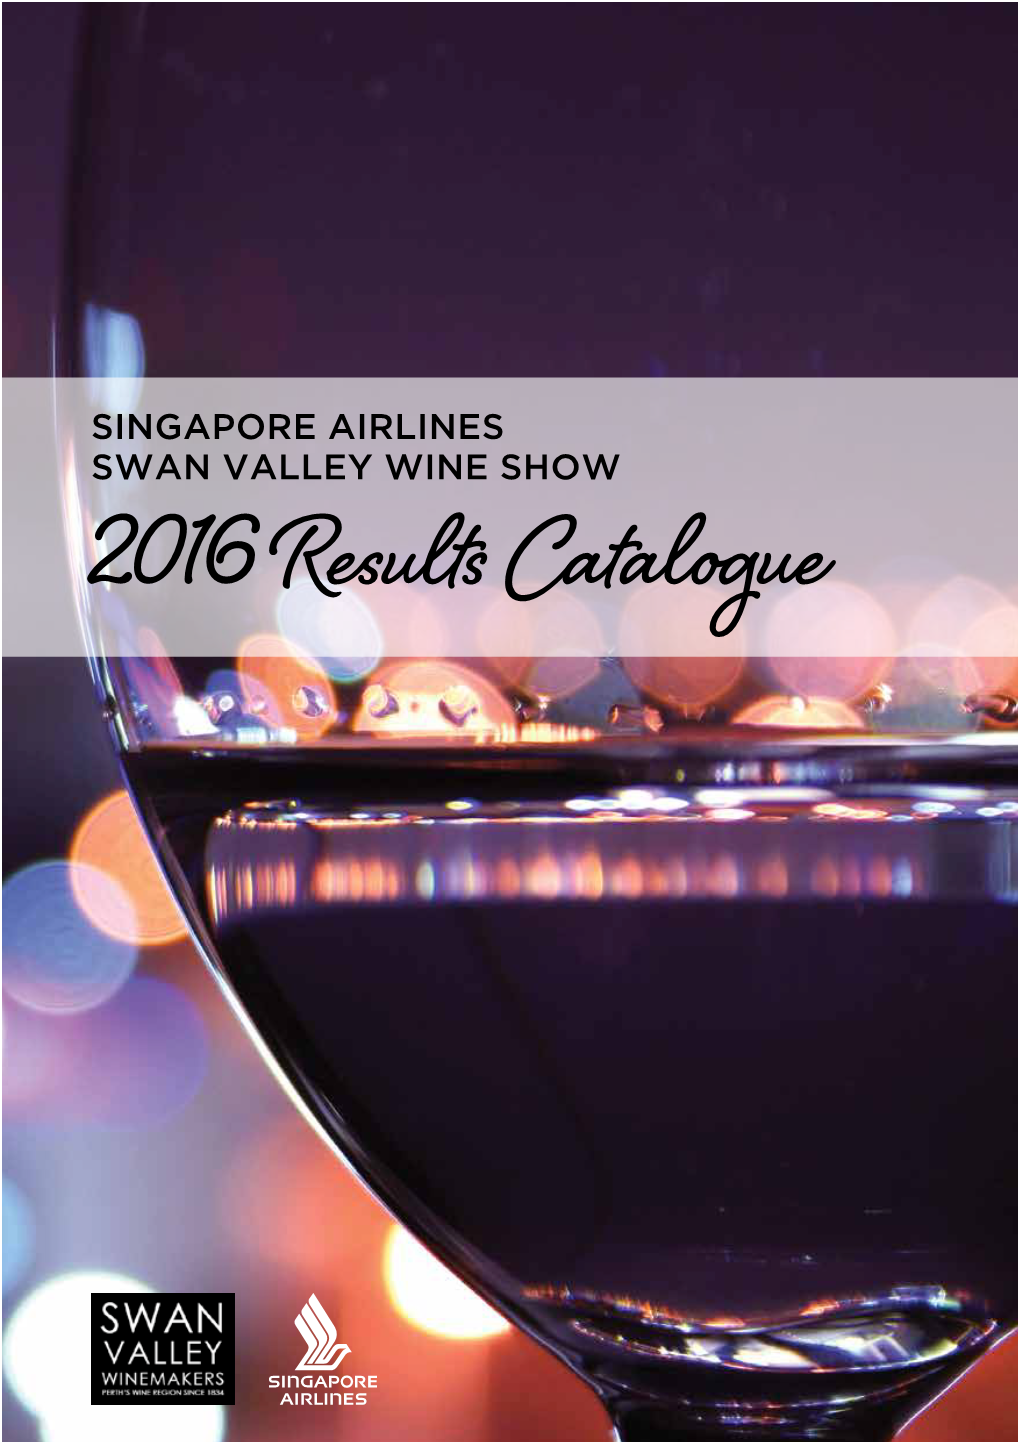 SINGAPORE AIRLINES SWAN VALLEY WINE SHOW 2016 Results Catalogue SINGAPORE AIRLINES SWAN VALLEY WINE SHOW 2016 Judges